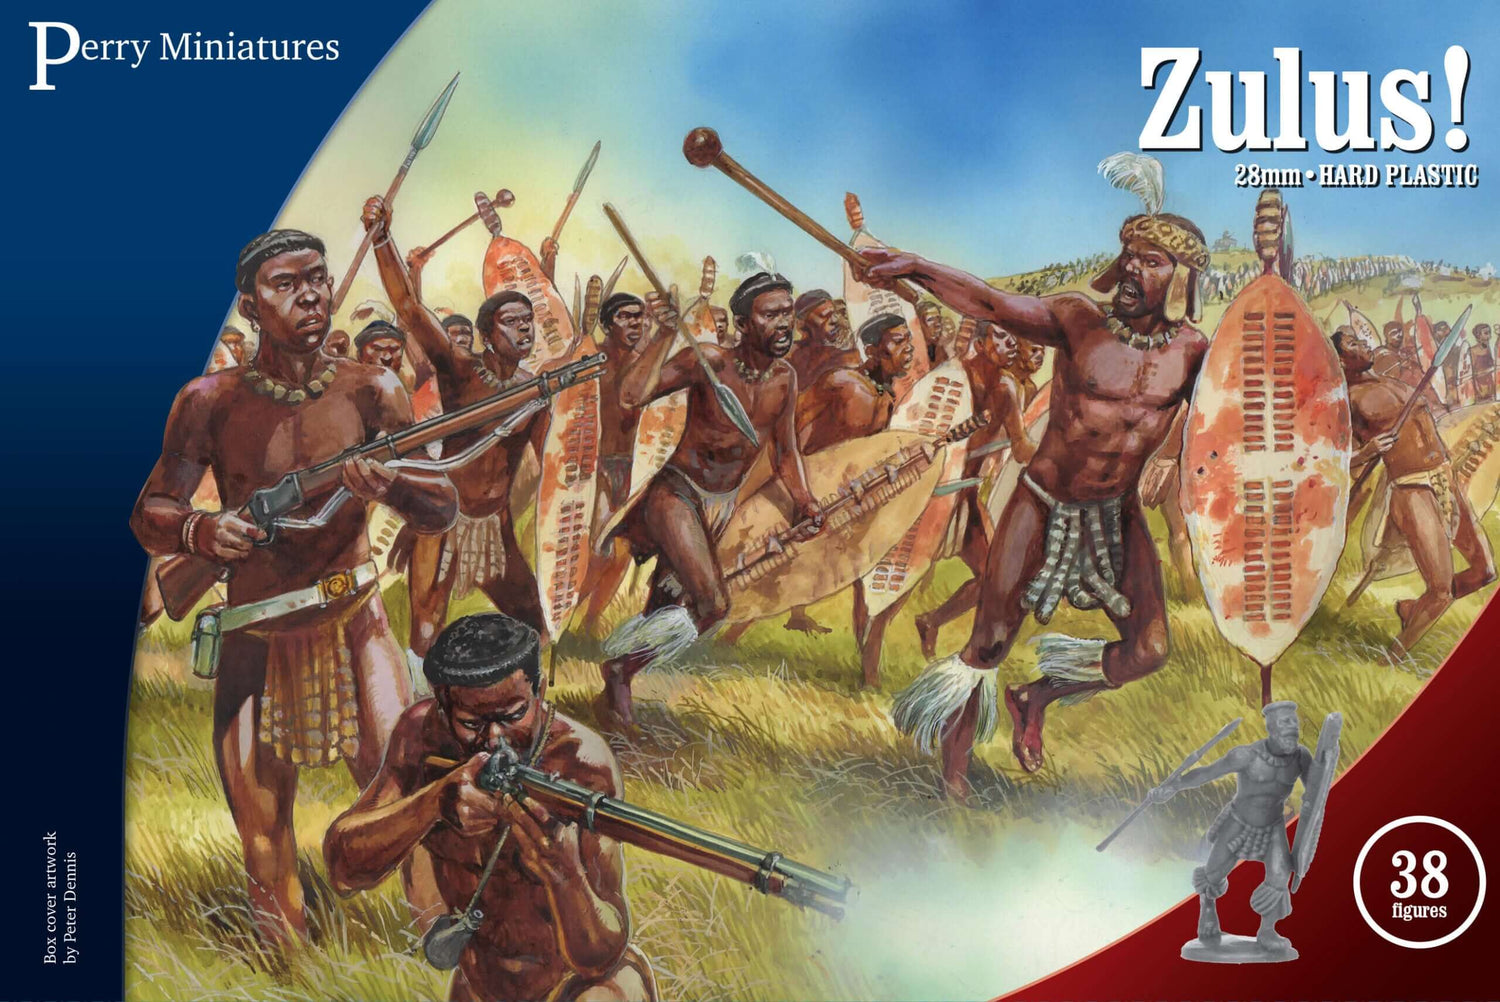 ZULUS PERRY